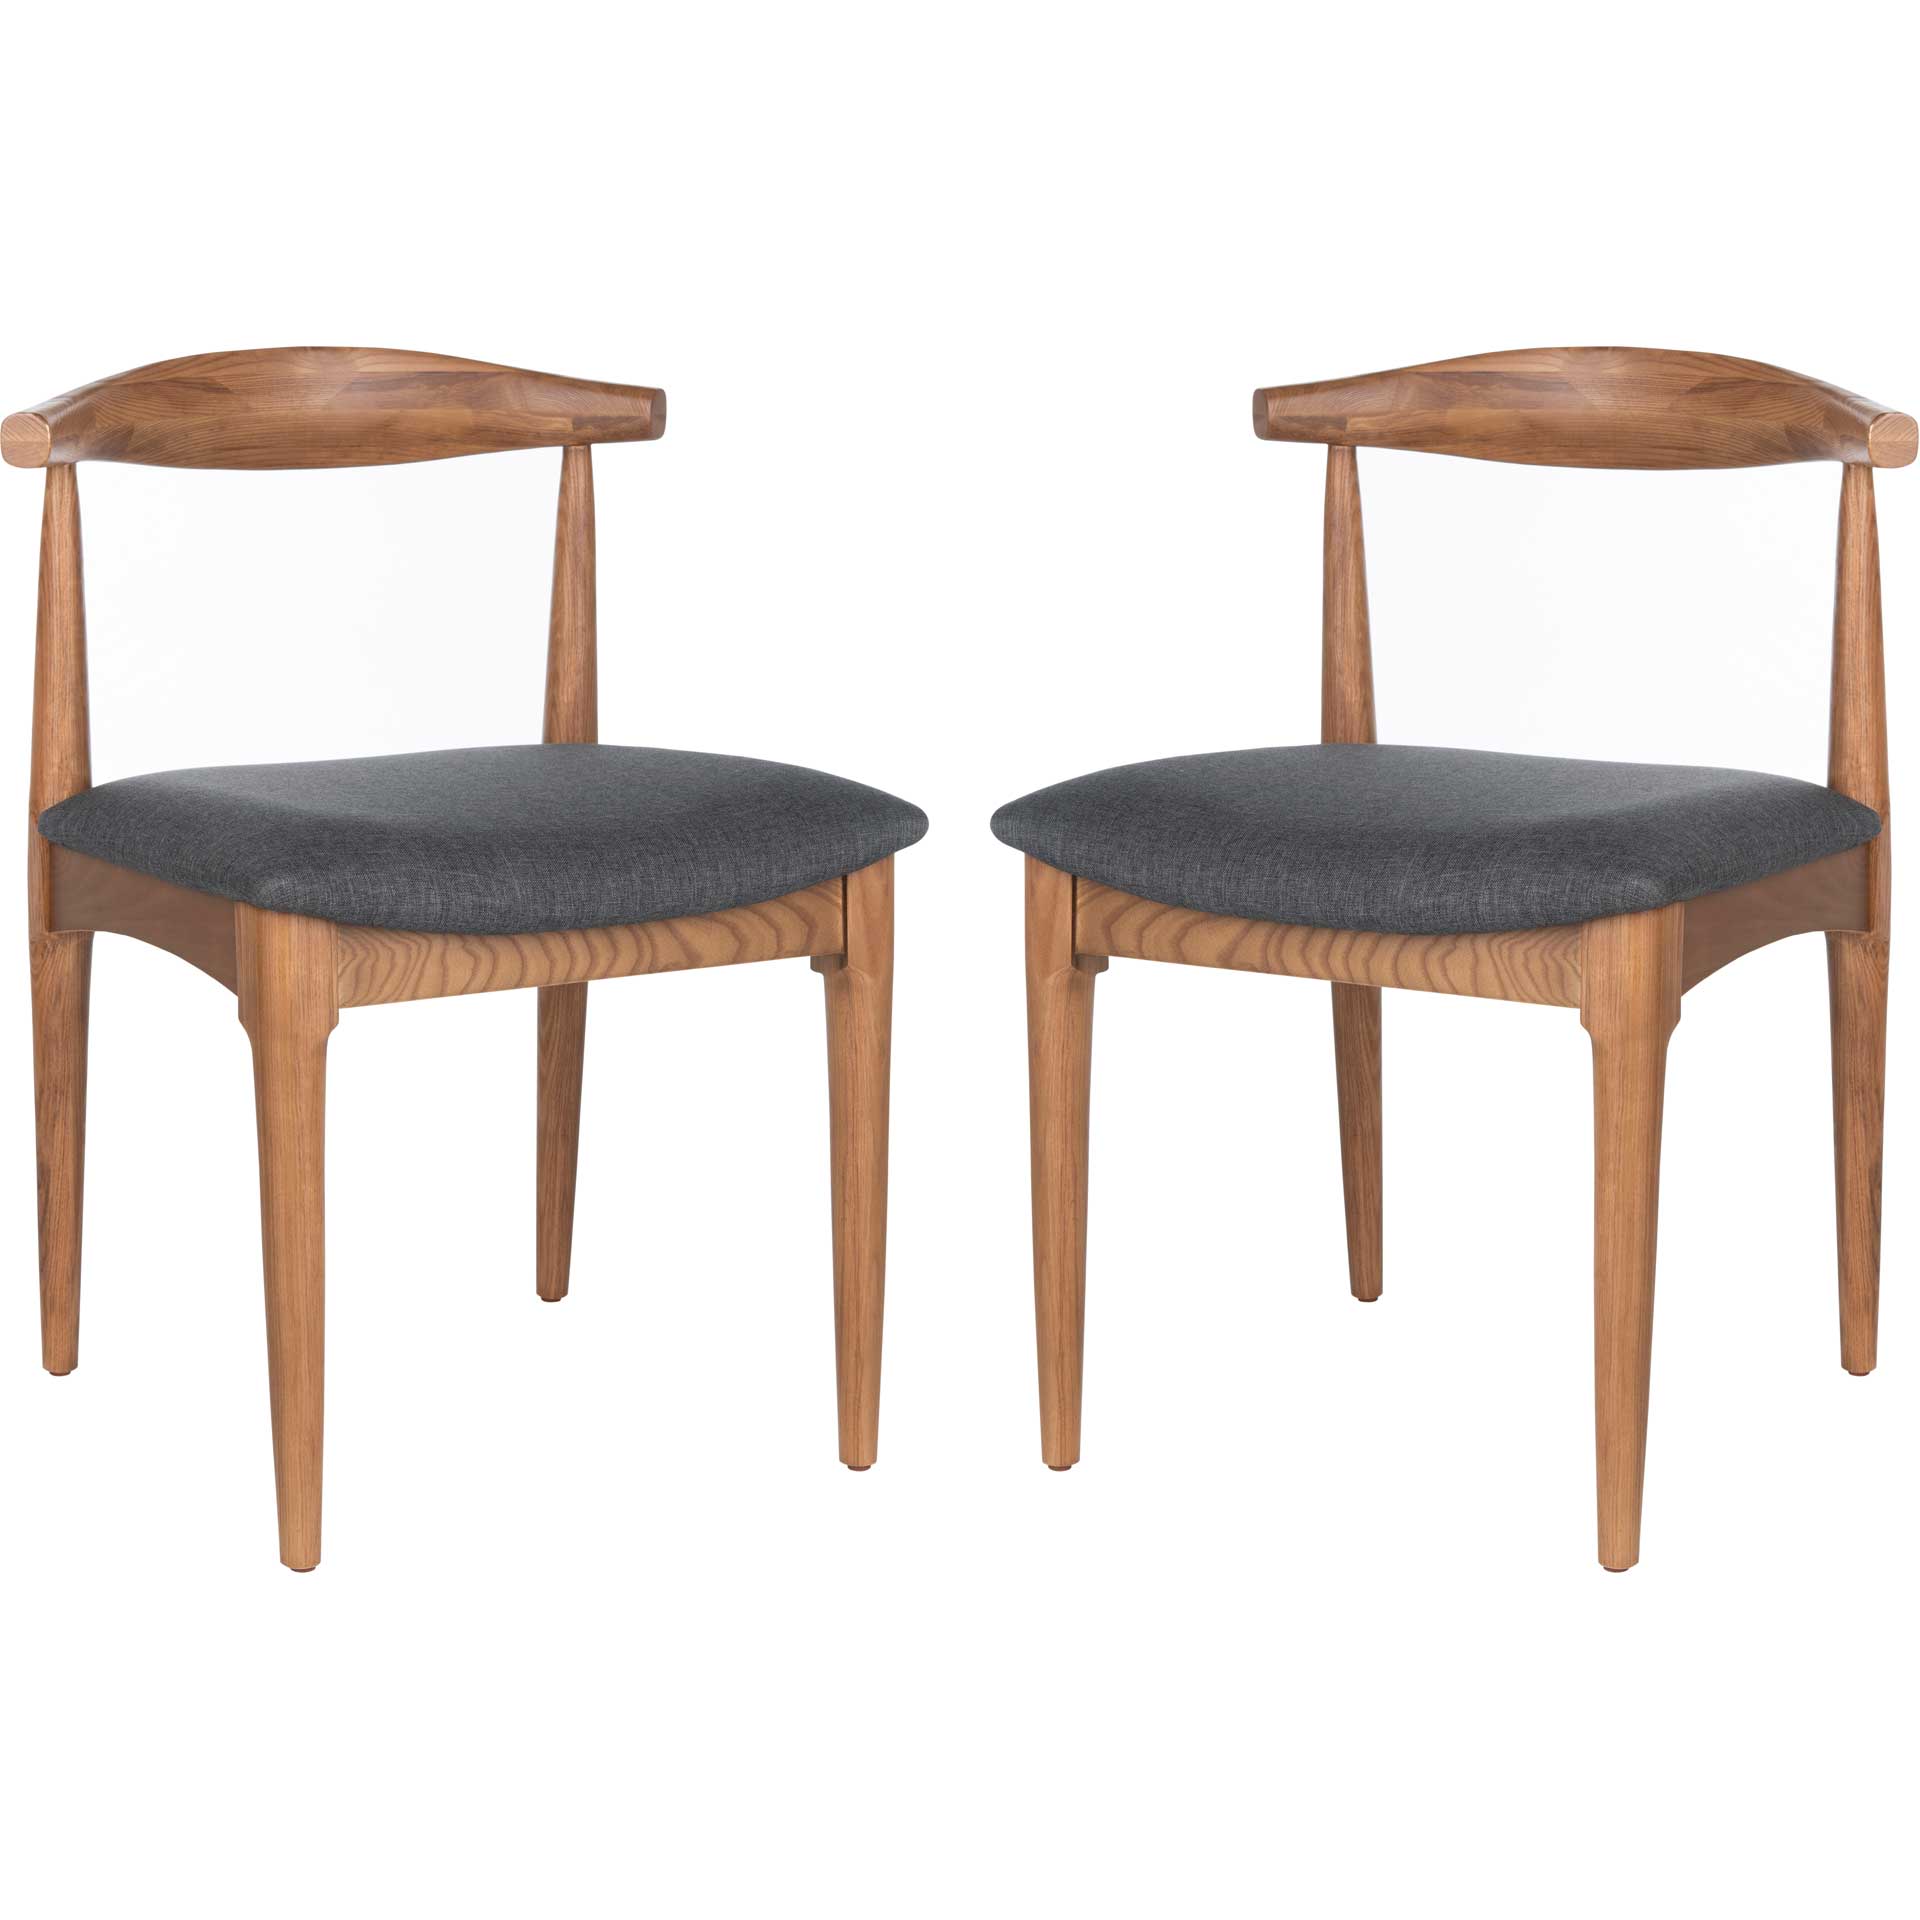 Lilly Dining Chair Brown/Dark Gray (Set of 2)